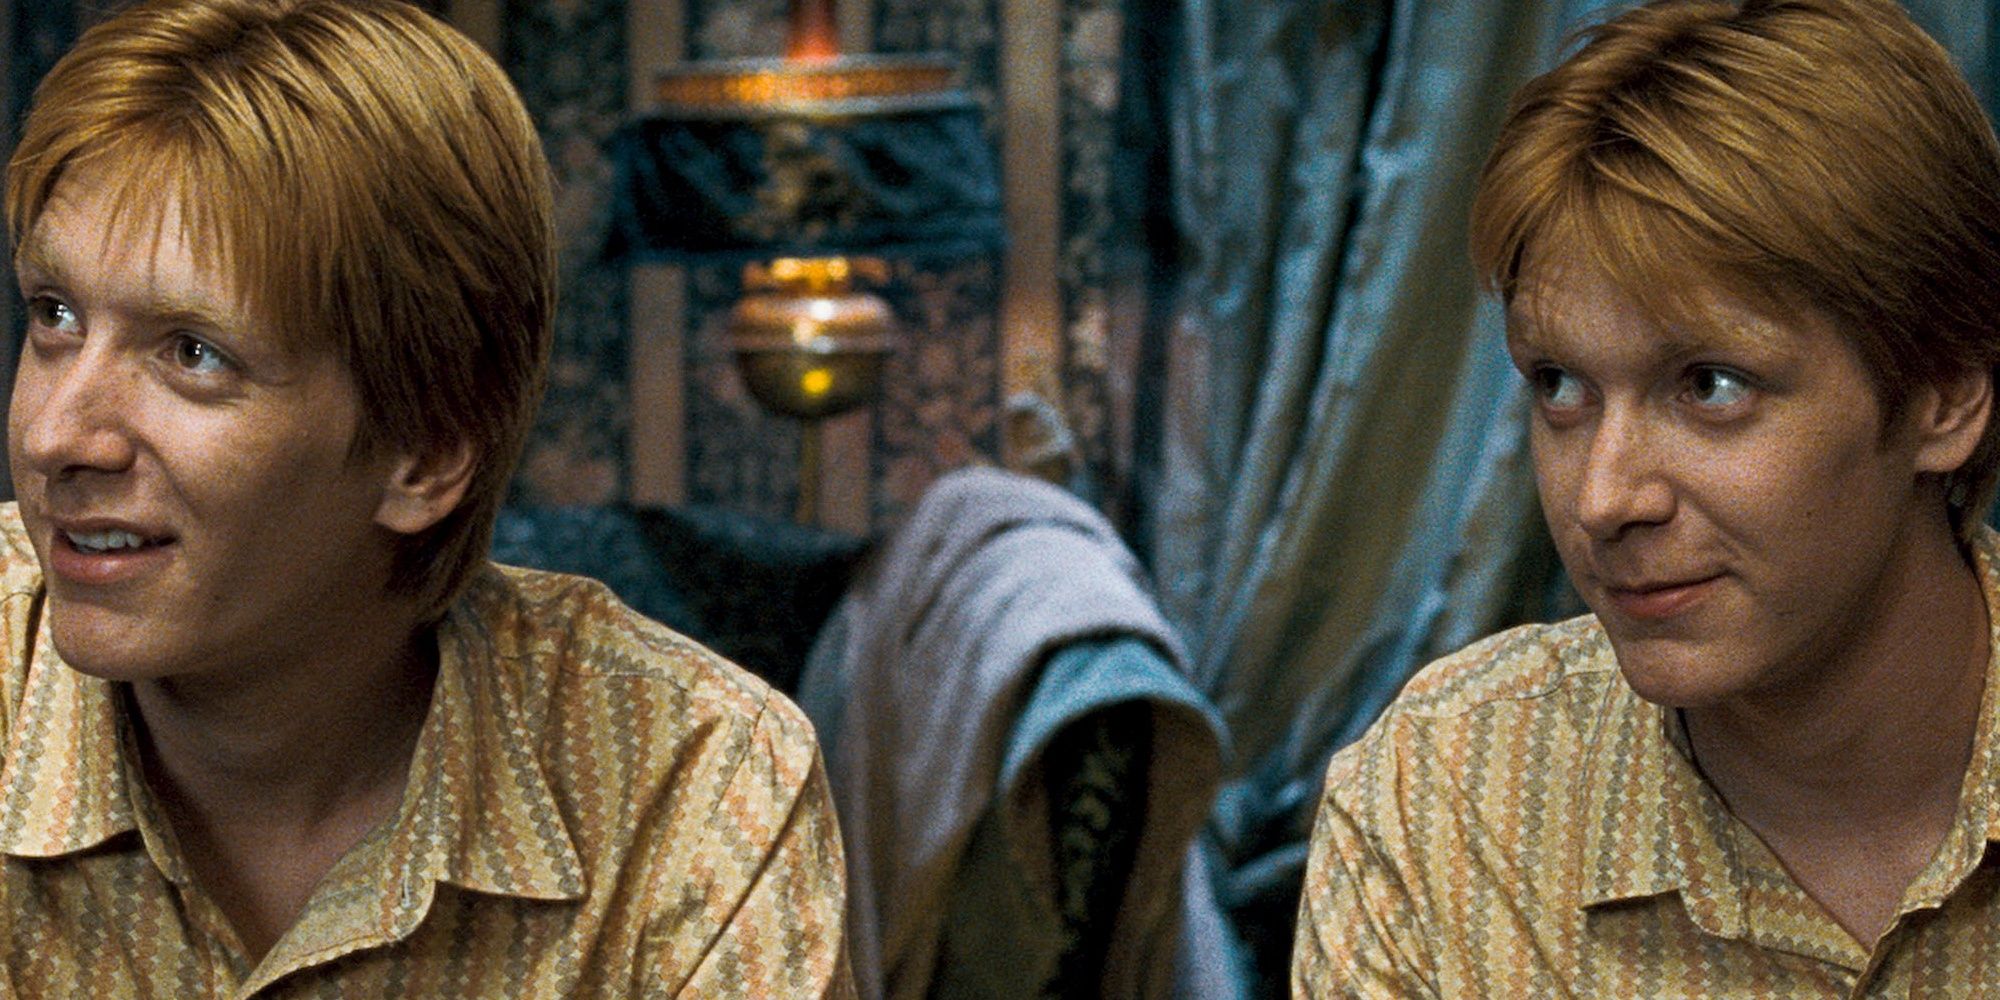 fred and george weasley wearing matching outfits in harry potter 